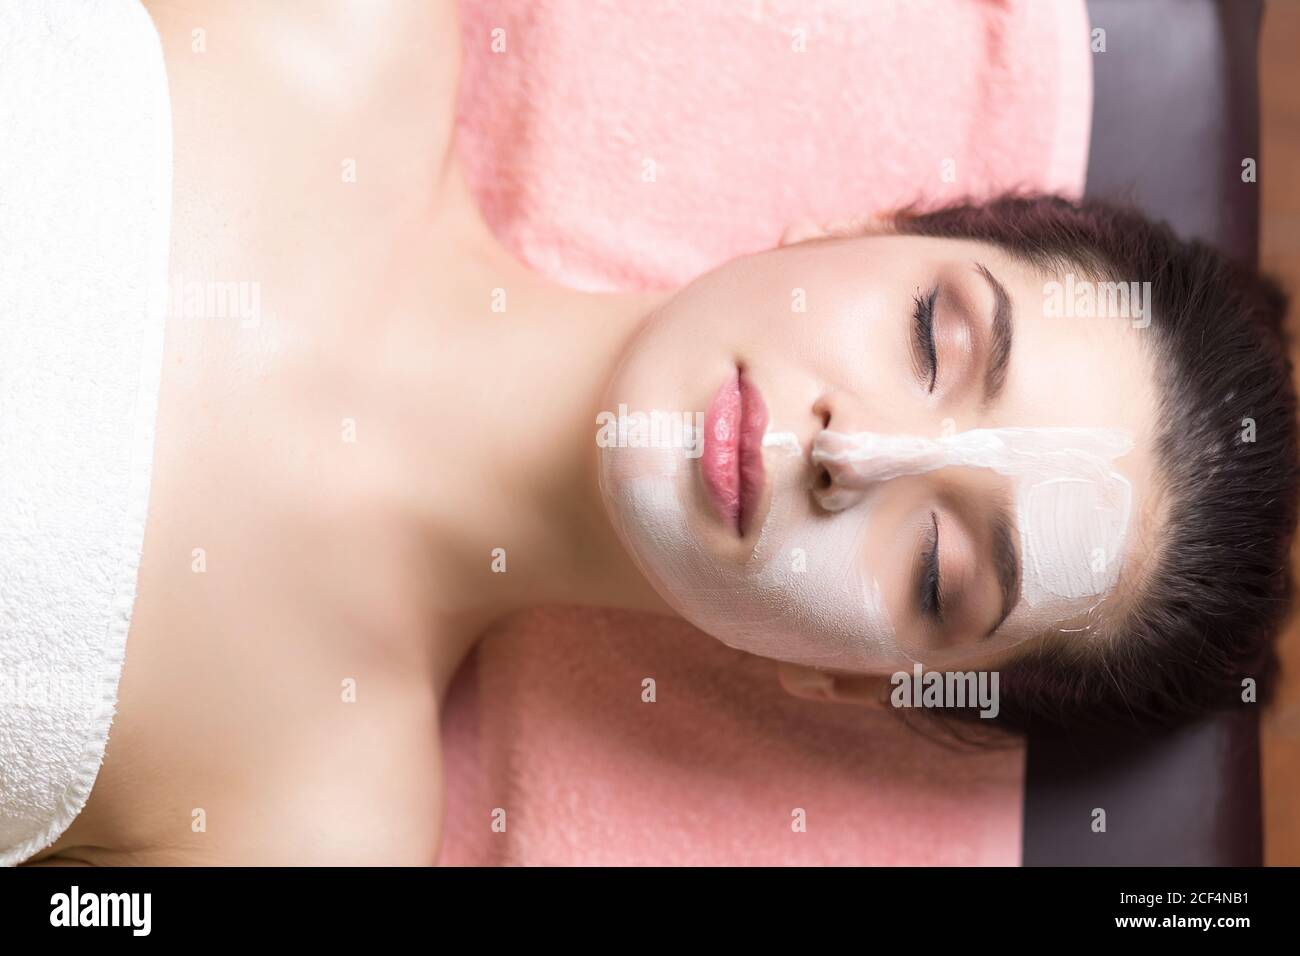 Spa Woman applying Facial cleansing Mask. Beauty Treatments Stock Photo